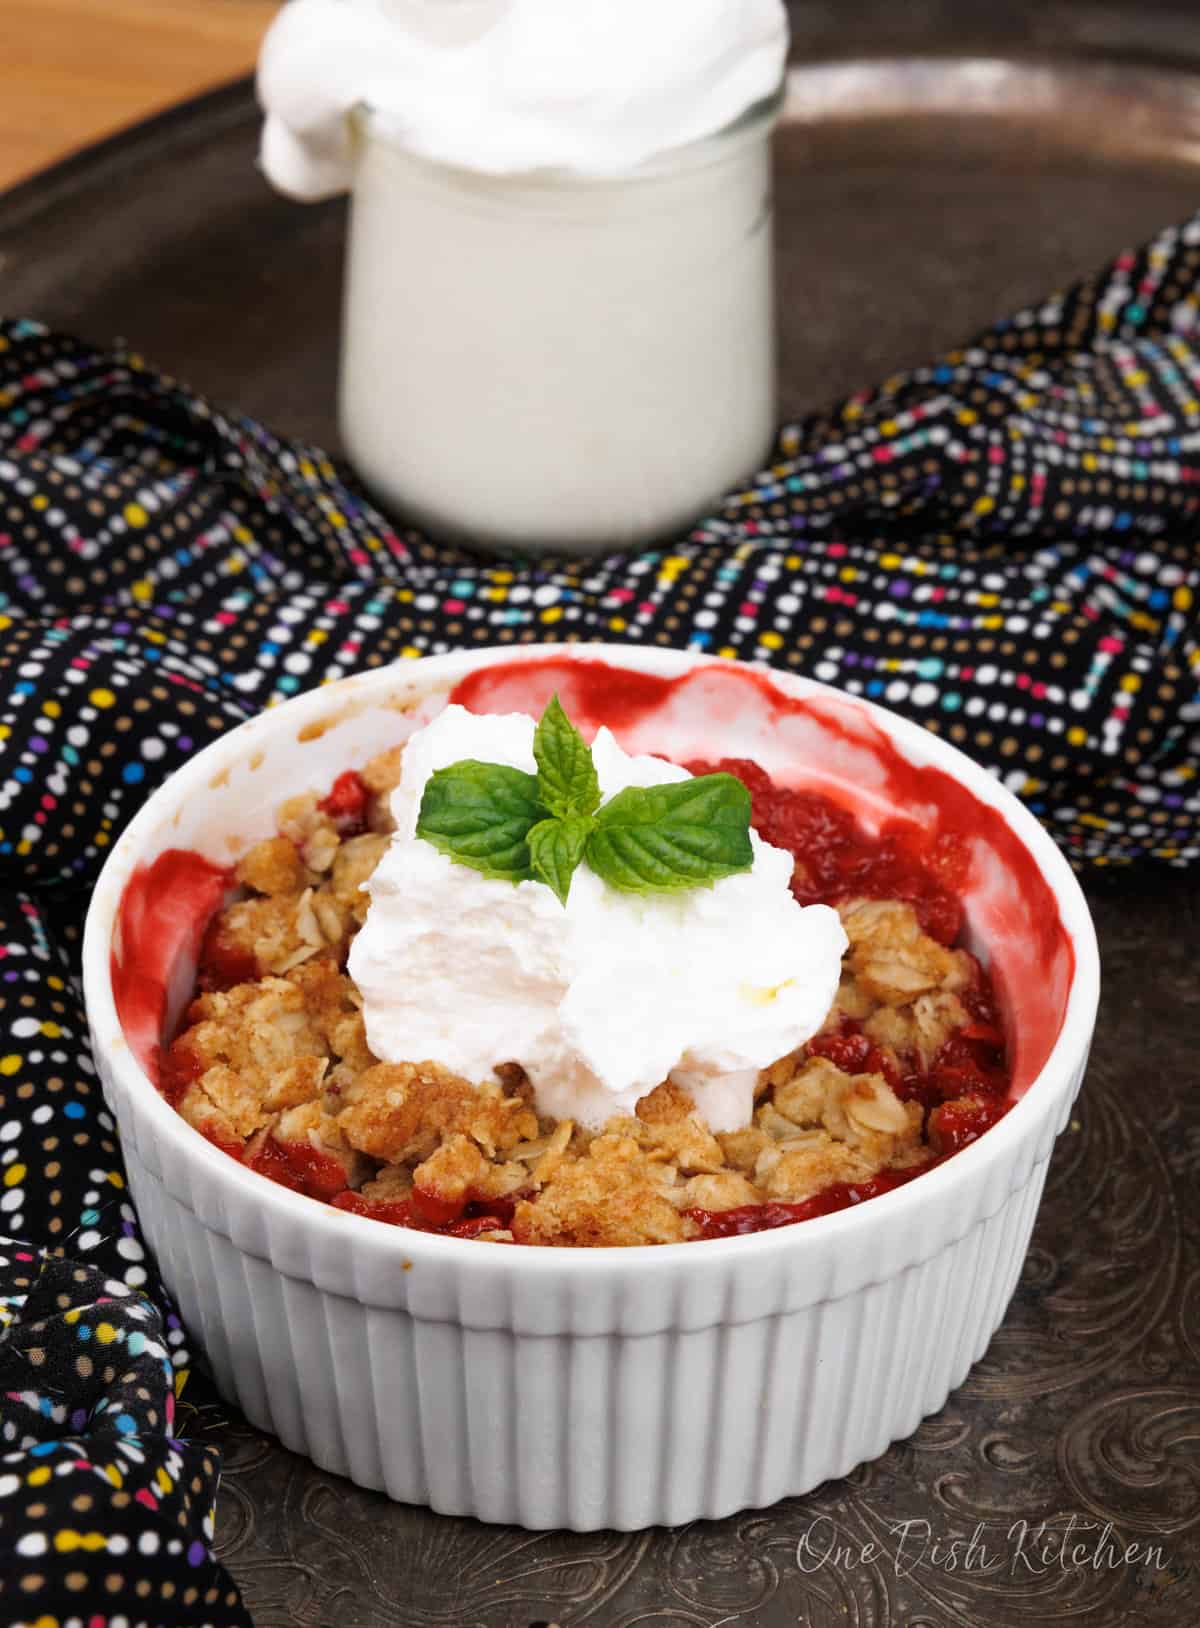 a mini strawberry crisp topped with whipped cream and a spring of fresh mint on a silver tray